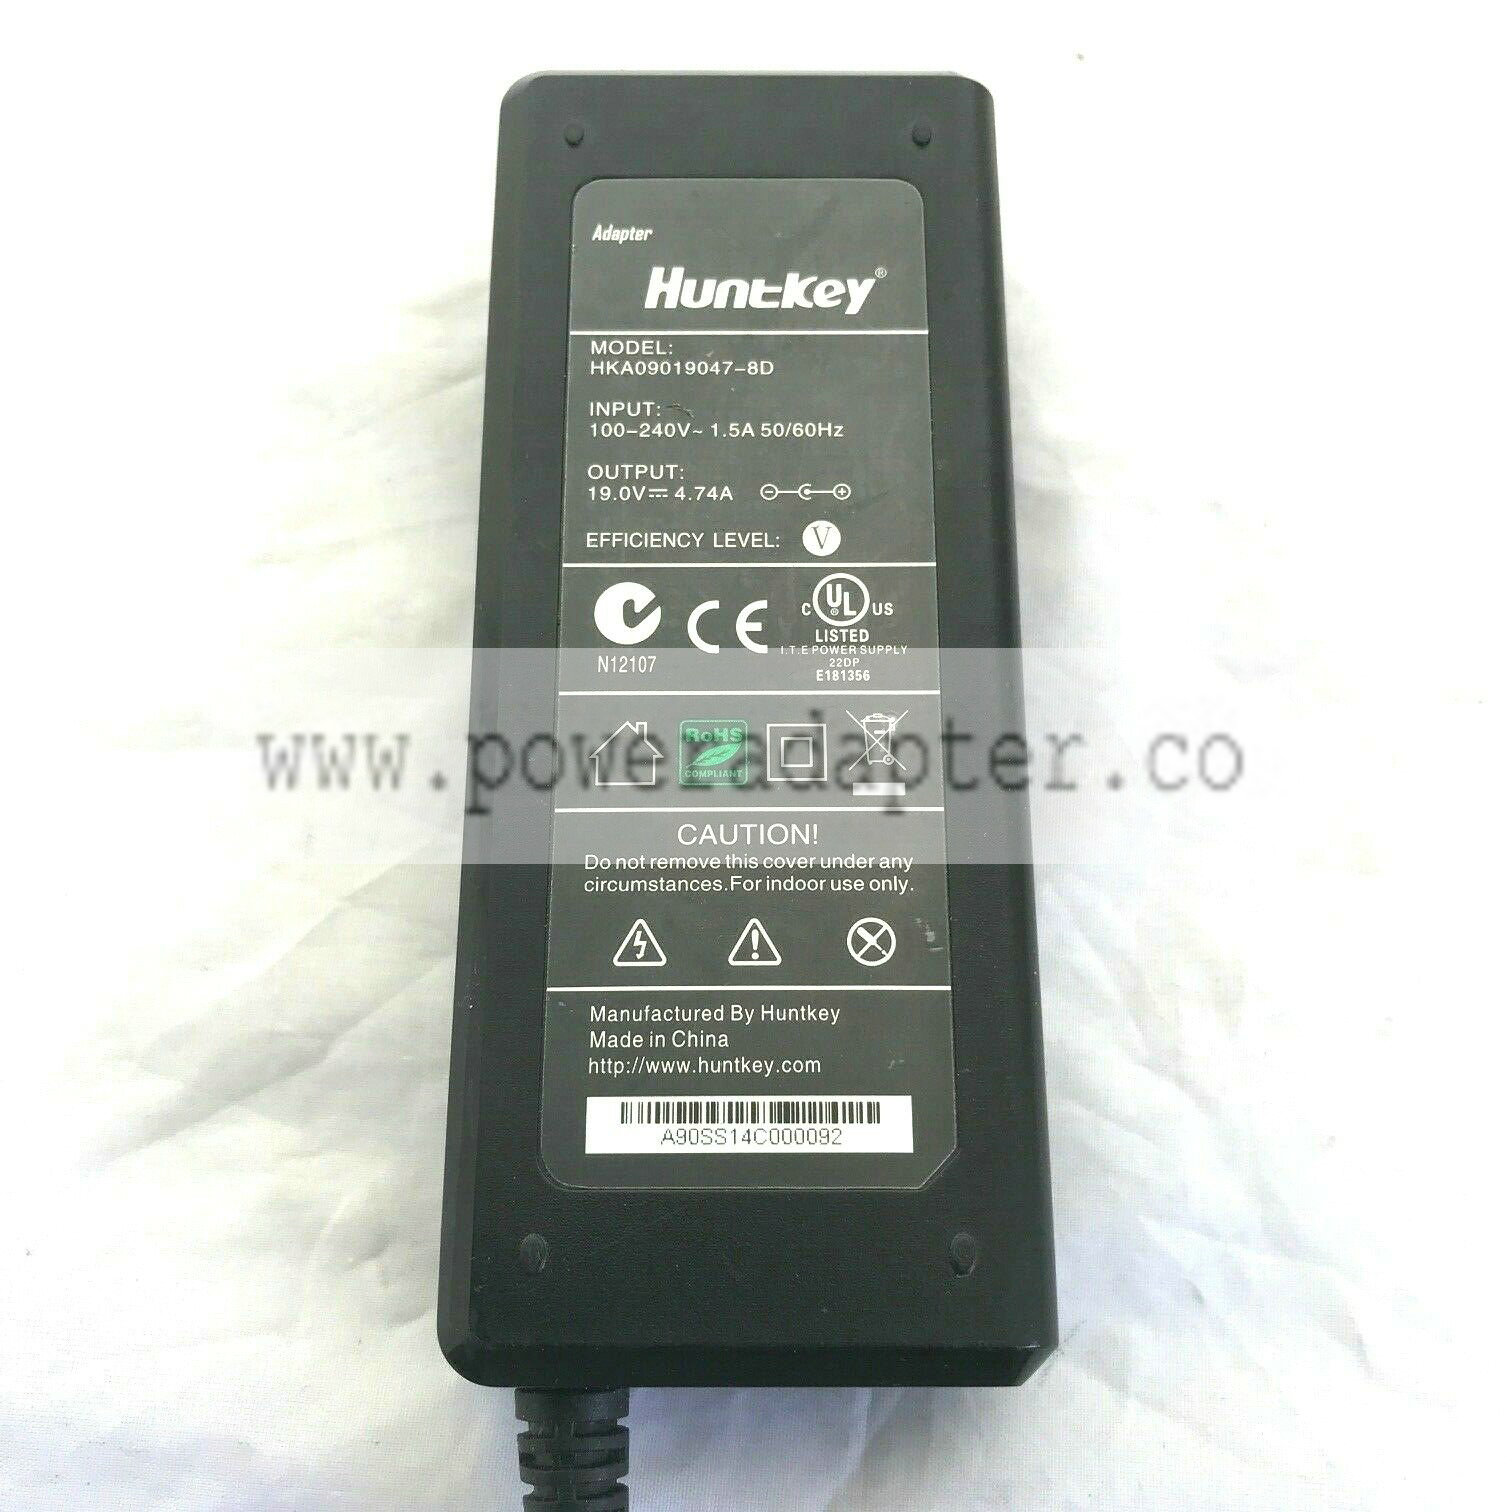 Huntkey HKA09019047-8D power Adapter 19v 4.74A Condition This item is a USED seller refurbished item and might have so